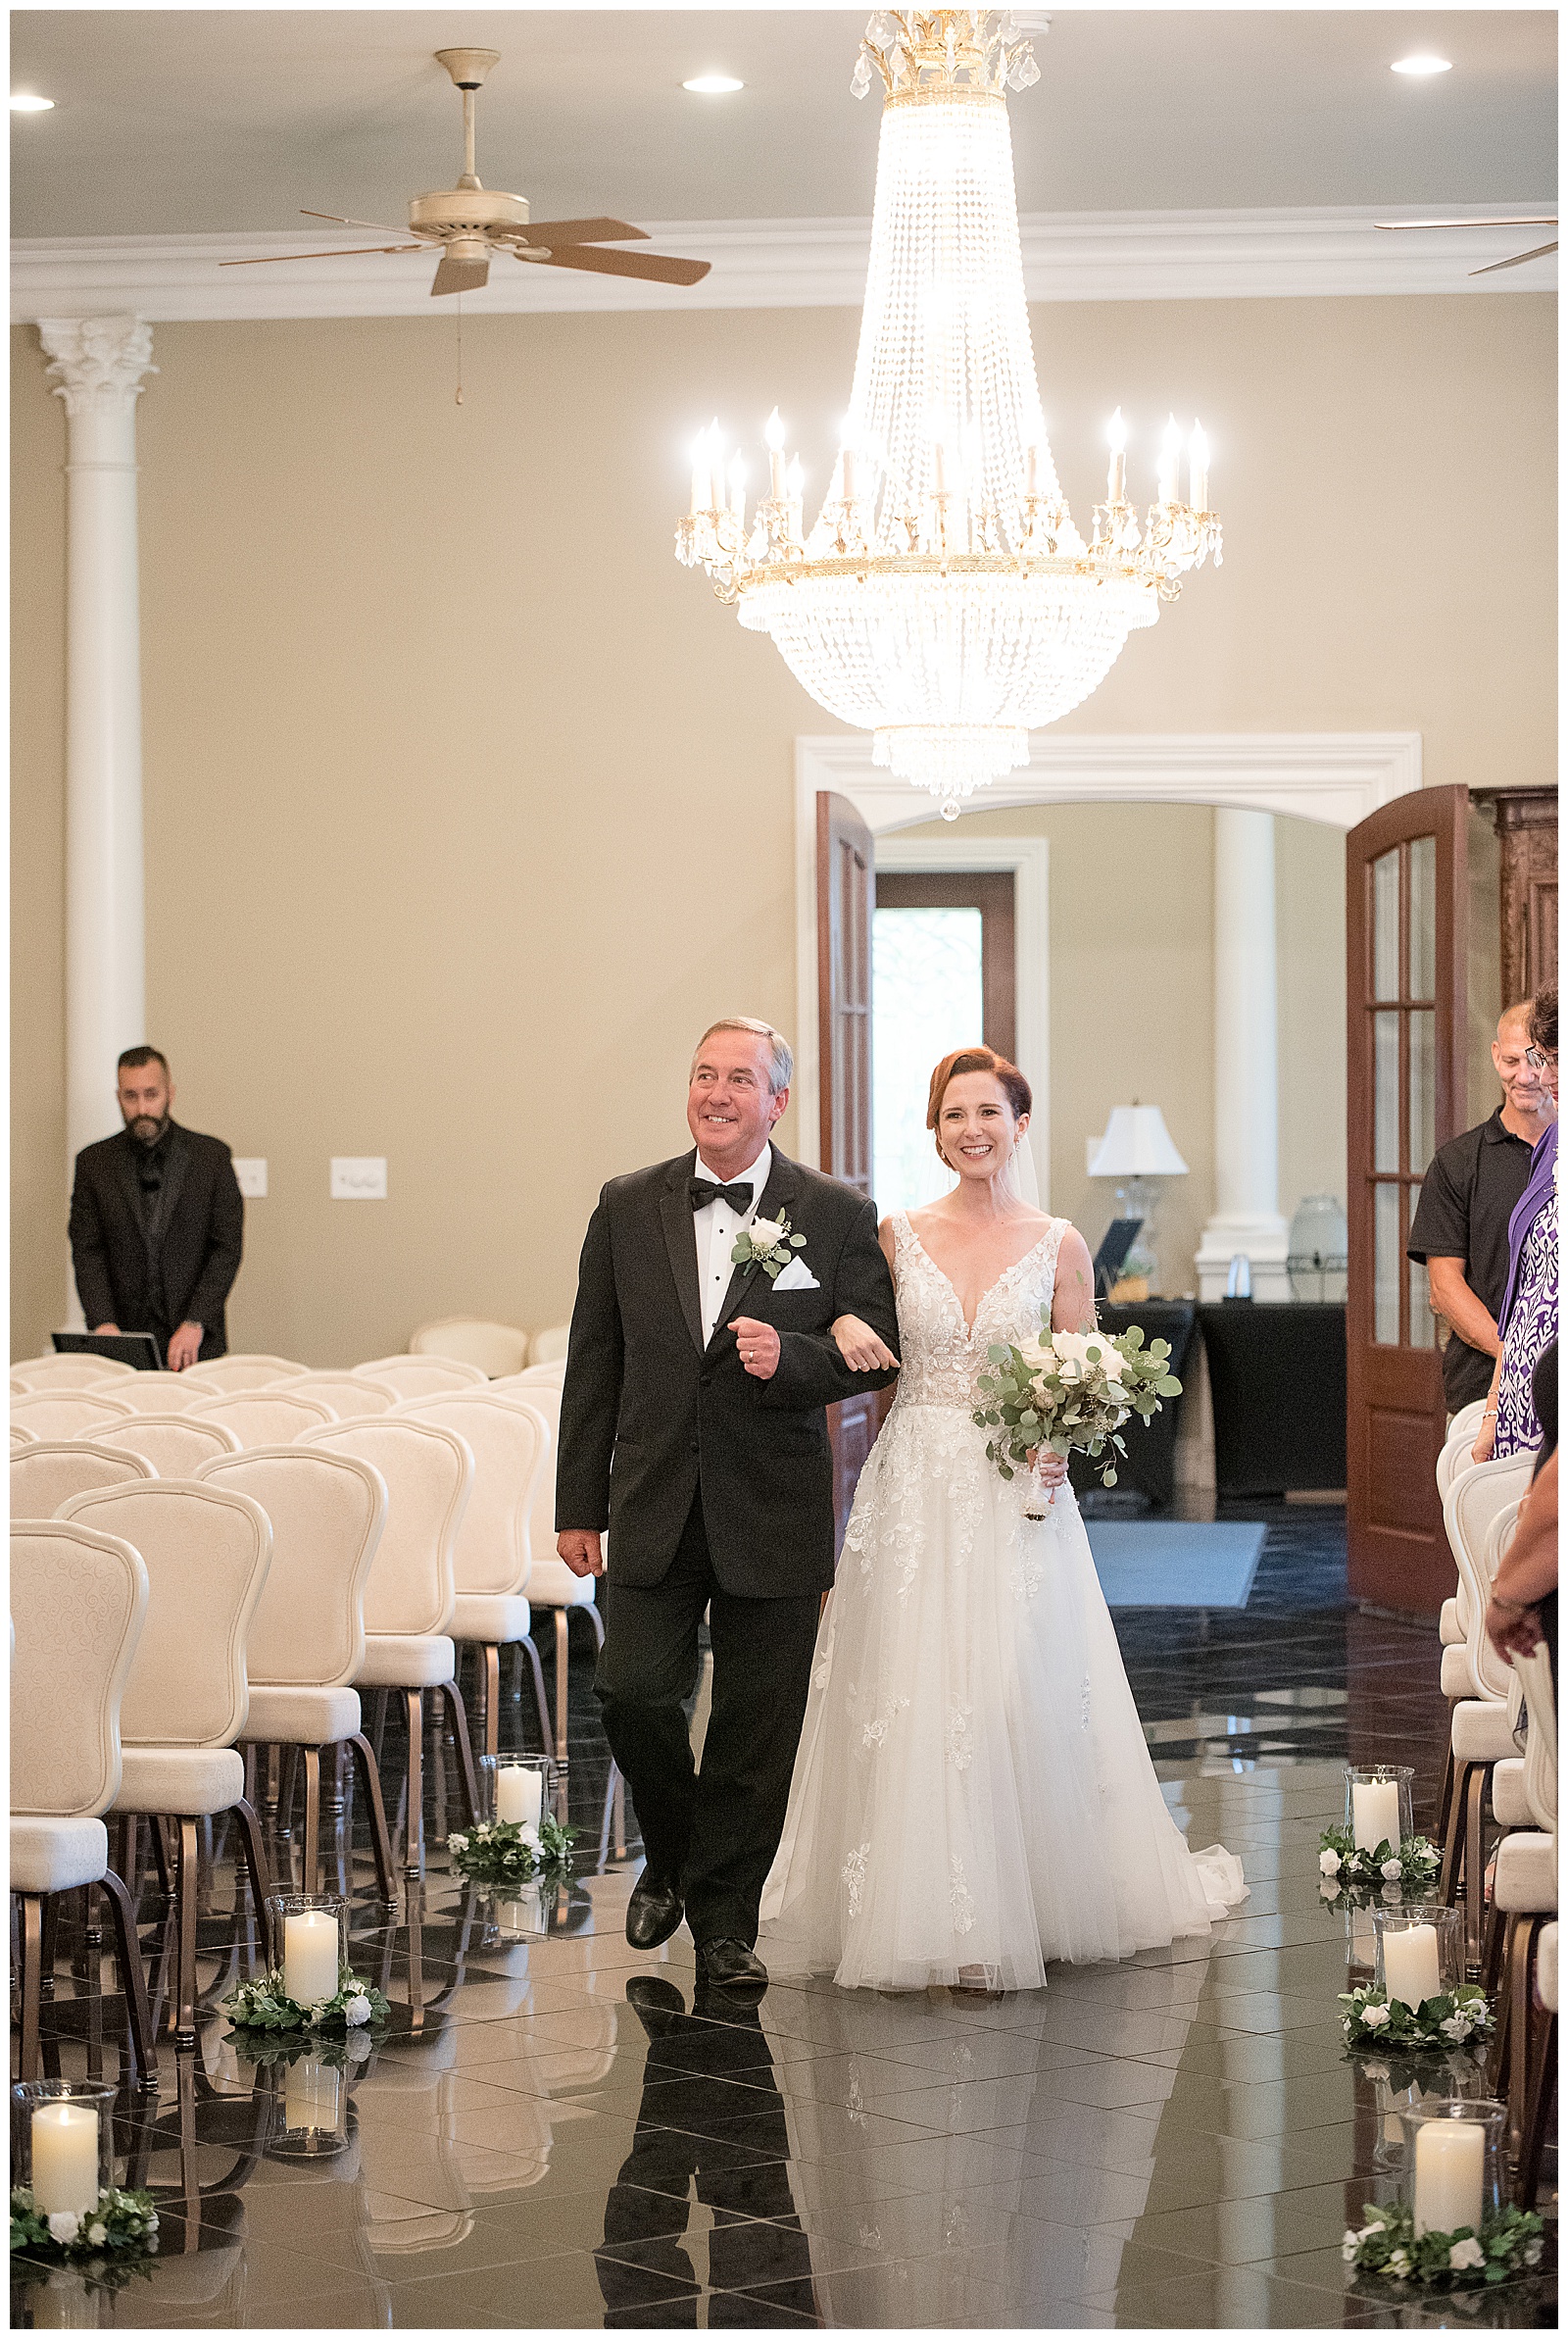 bride and her father walking down the aisle during indoor wedding ceremony with chandelier above them at cameron estate inn